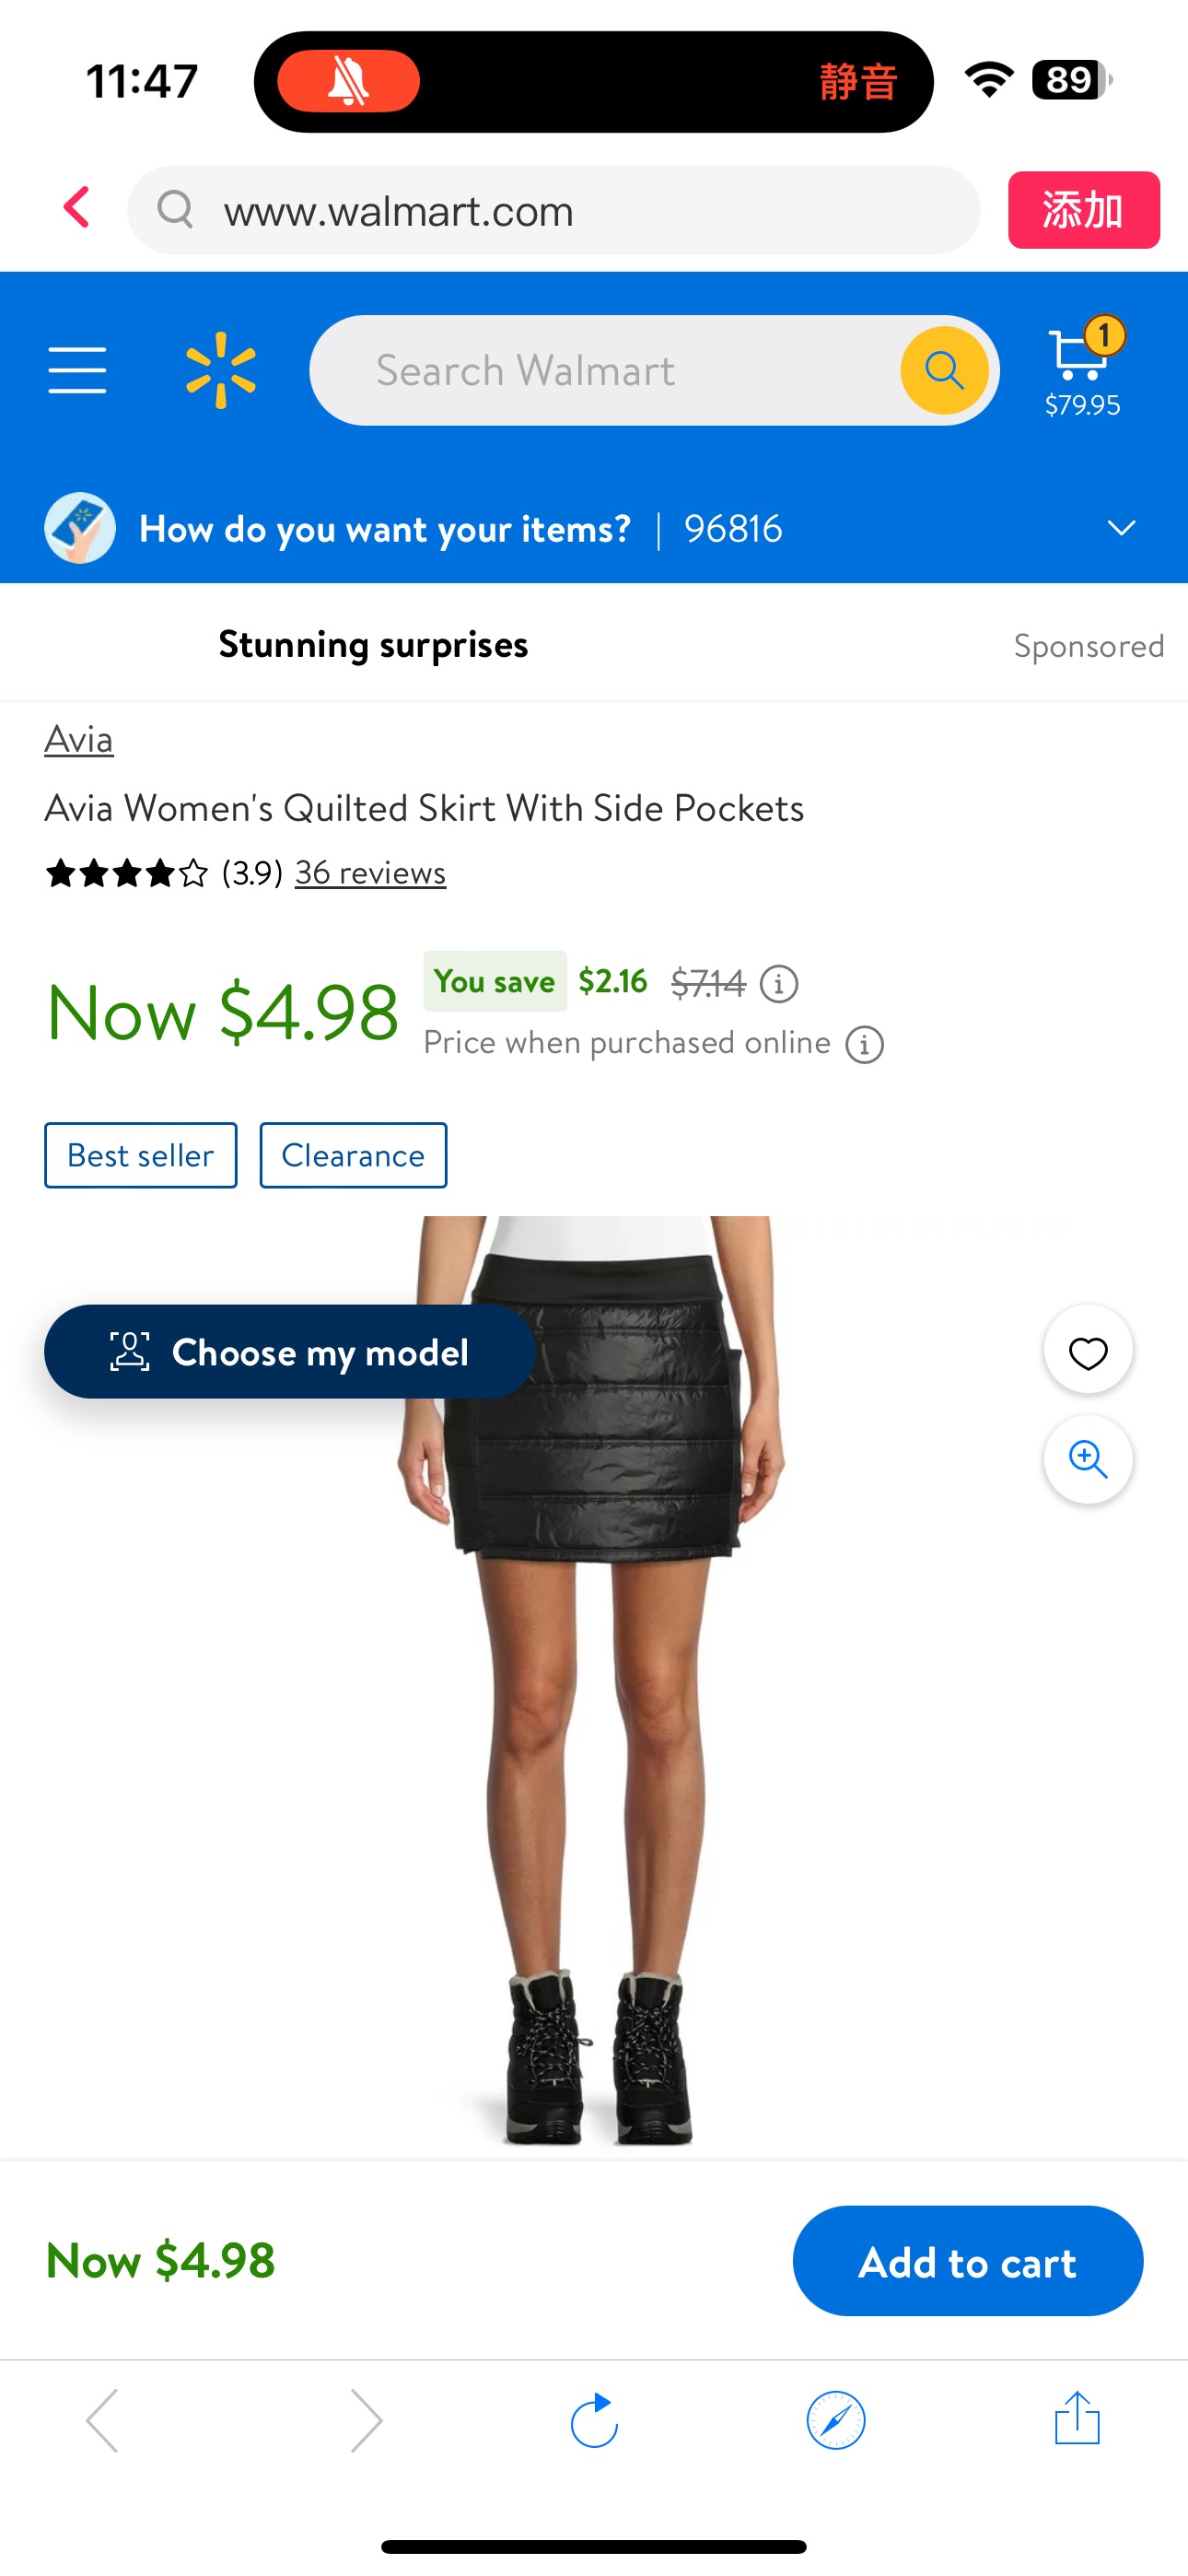 Avia Women's Quilted Skirt With Side Pockets - Walmart.com女棉服短裙